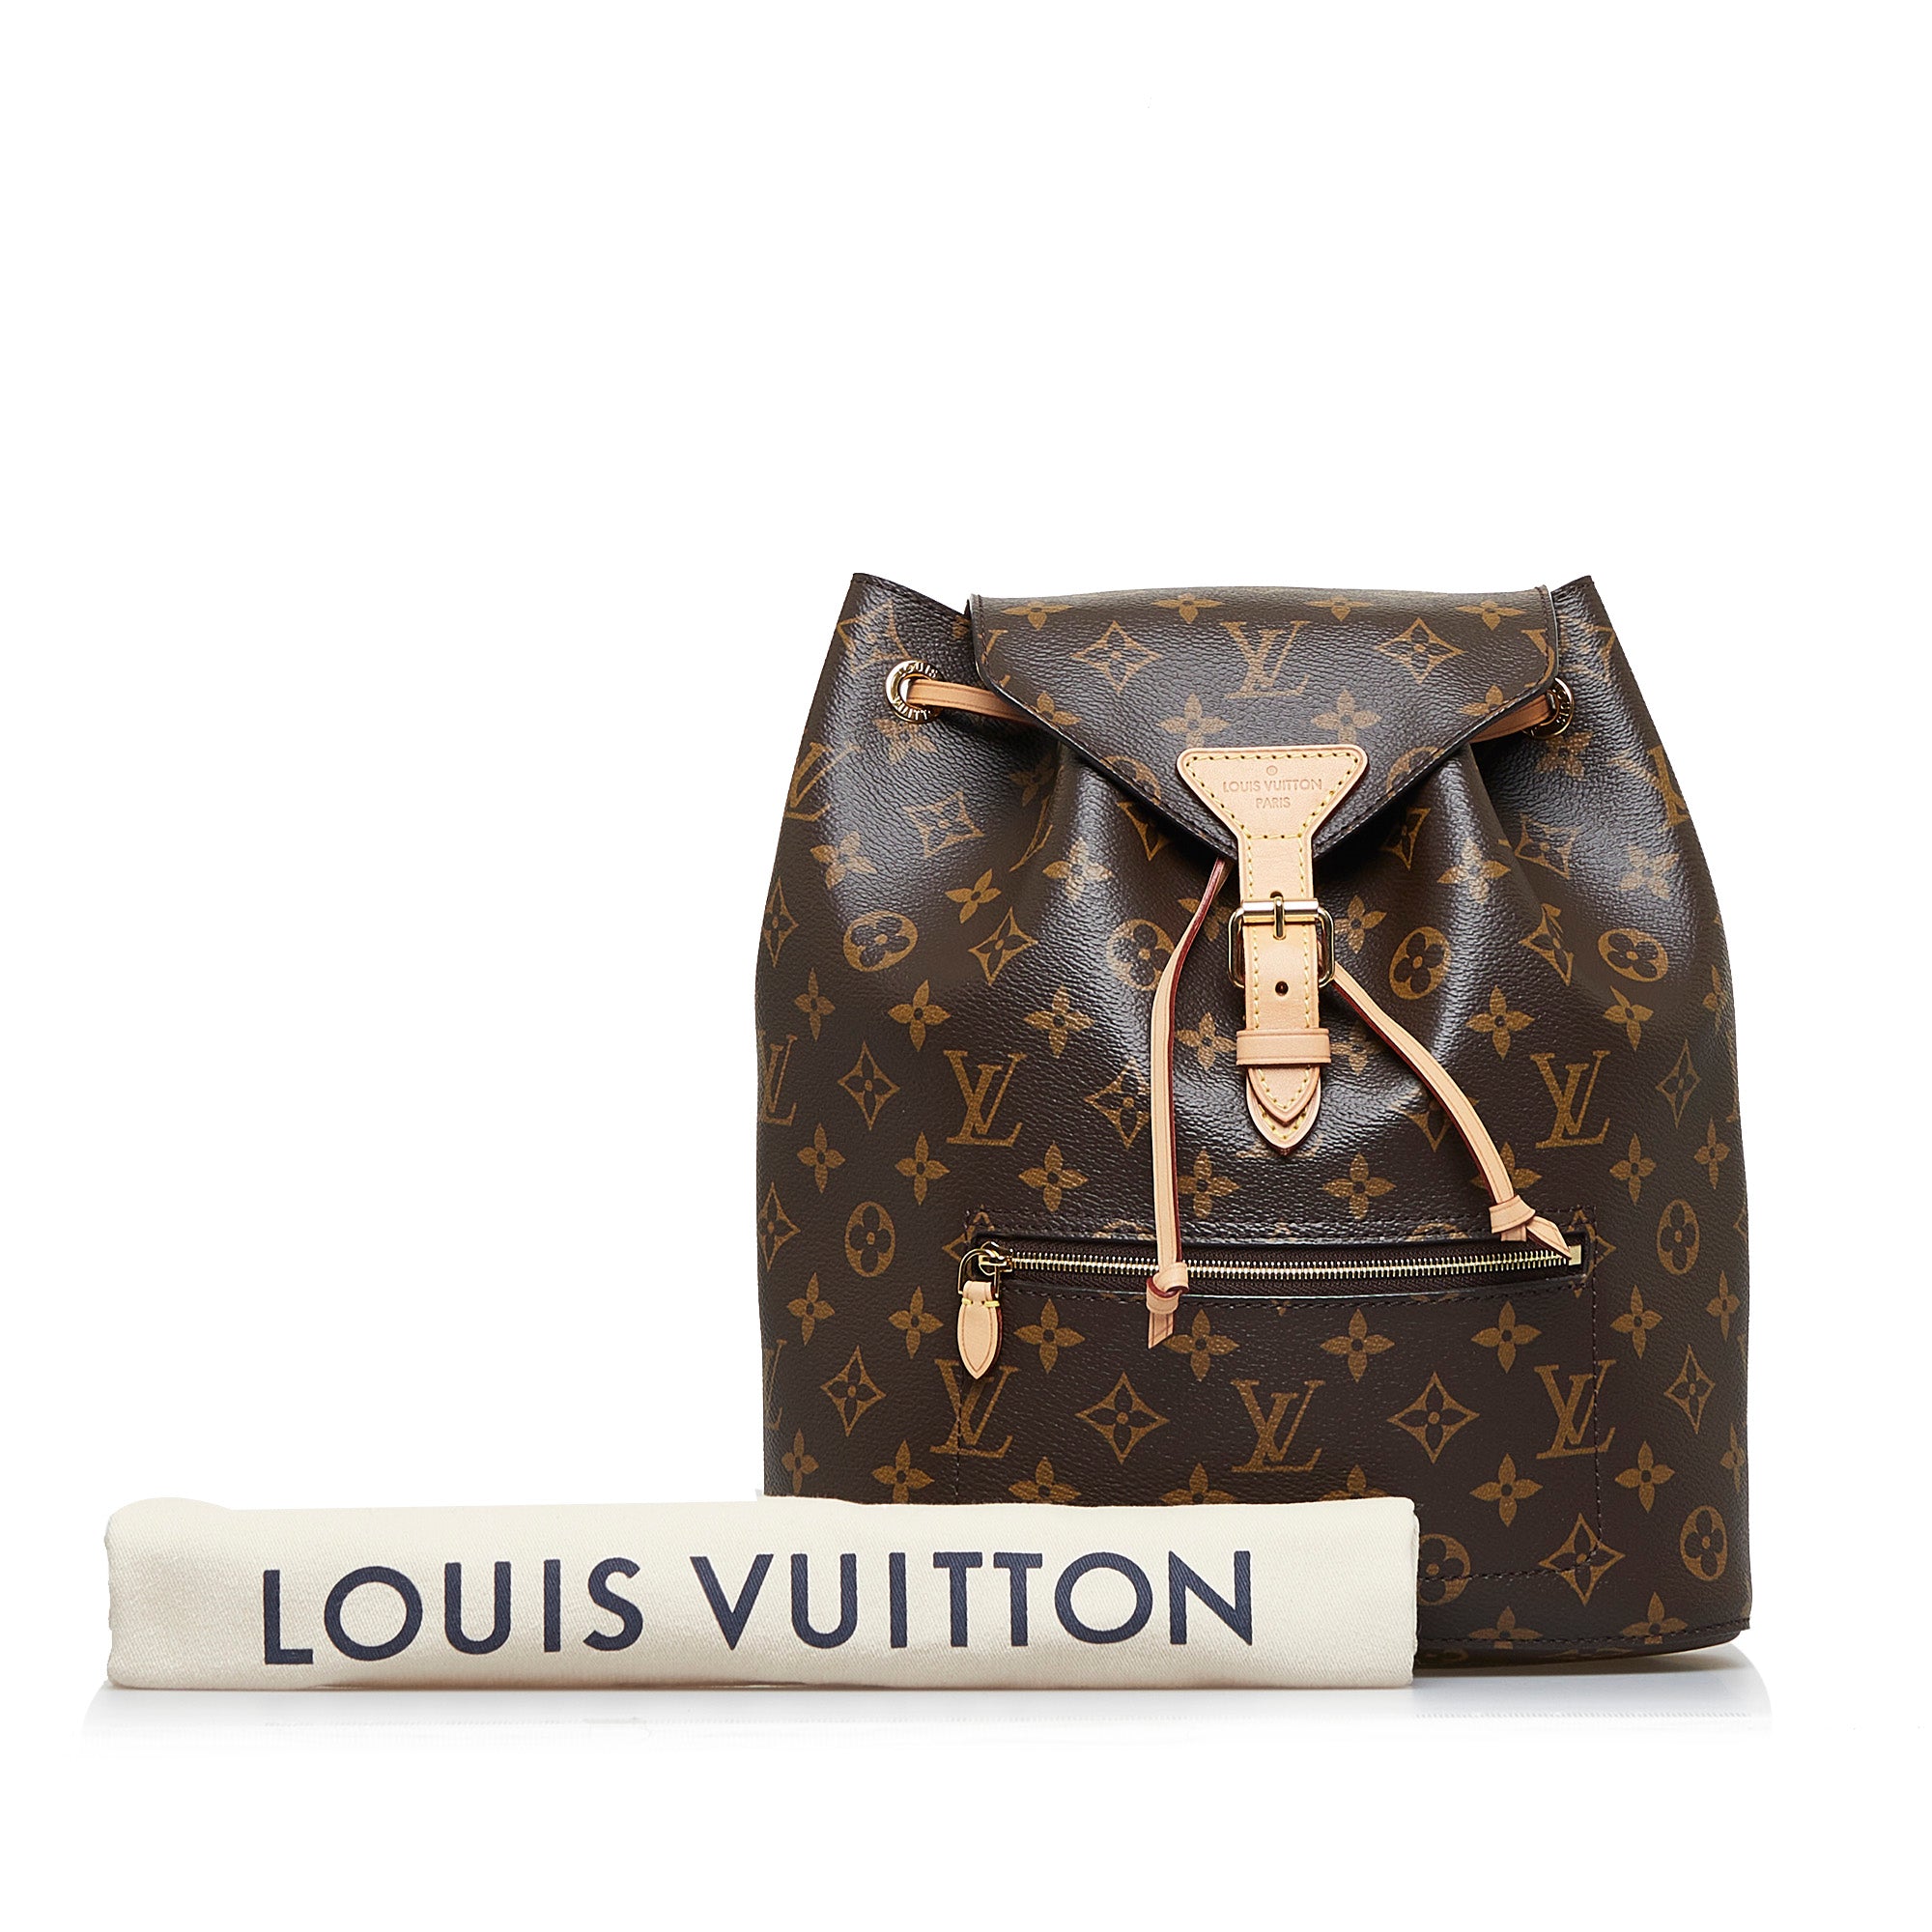 OOAK Louis Vuitton Hand Painted Leather Wrapped Montsouris GM